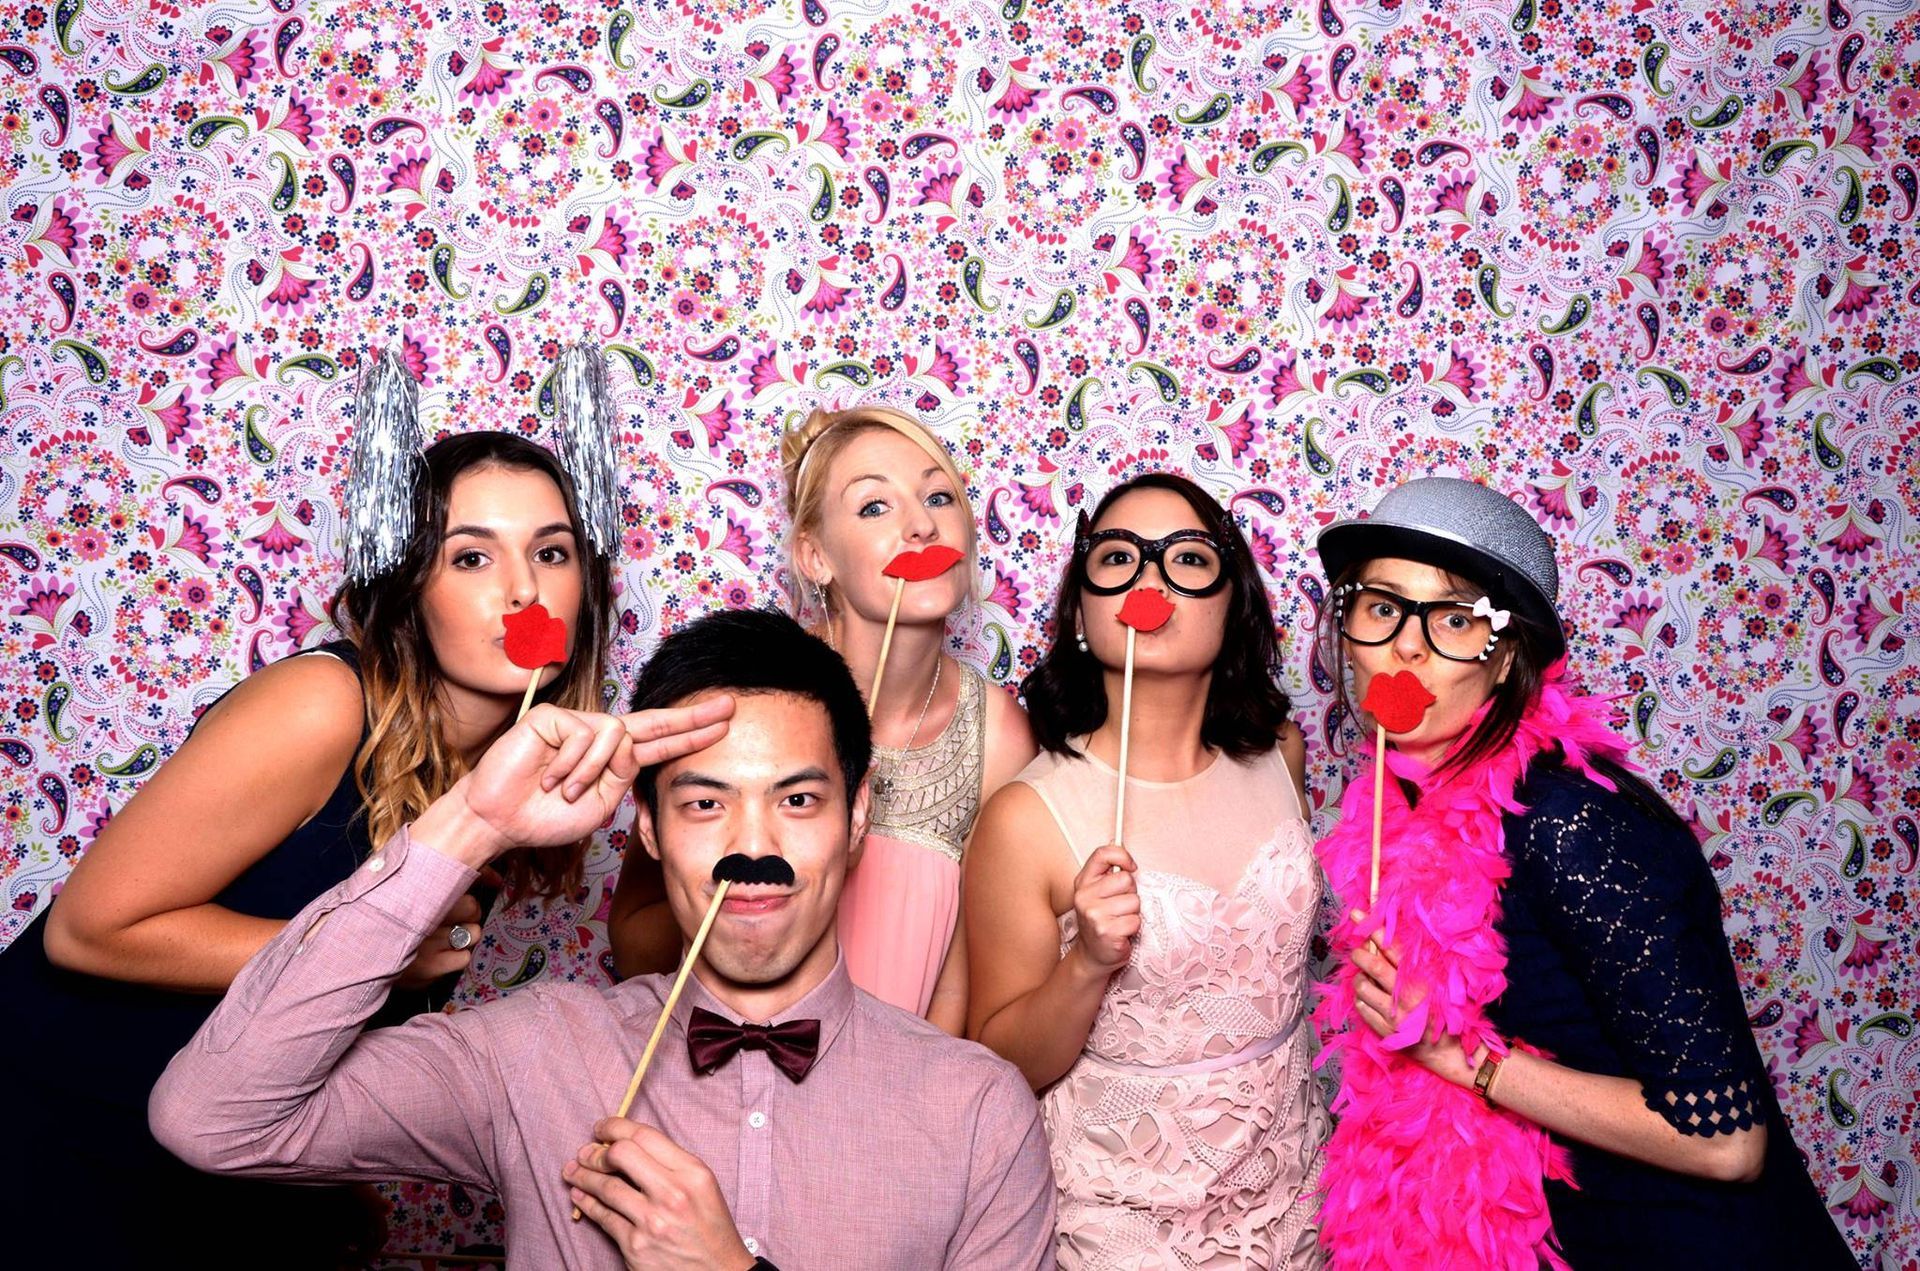 Adding joy and memories to a stunning Destination Wedding through our photo booth at Flash Party Photo Booth Houston.